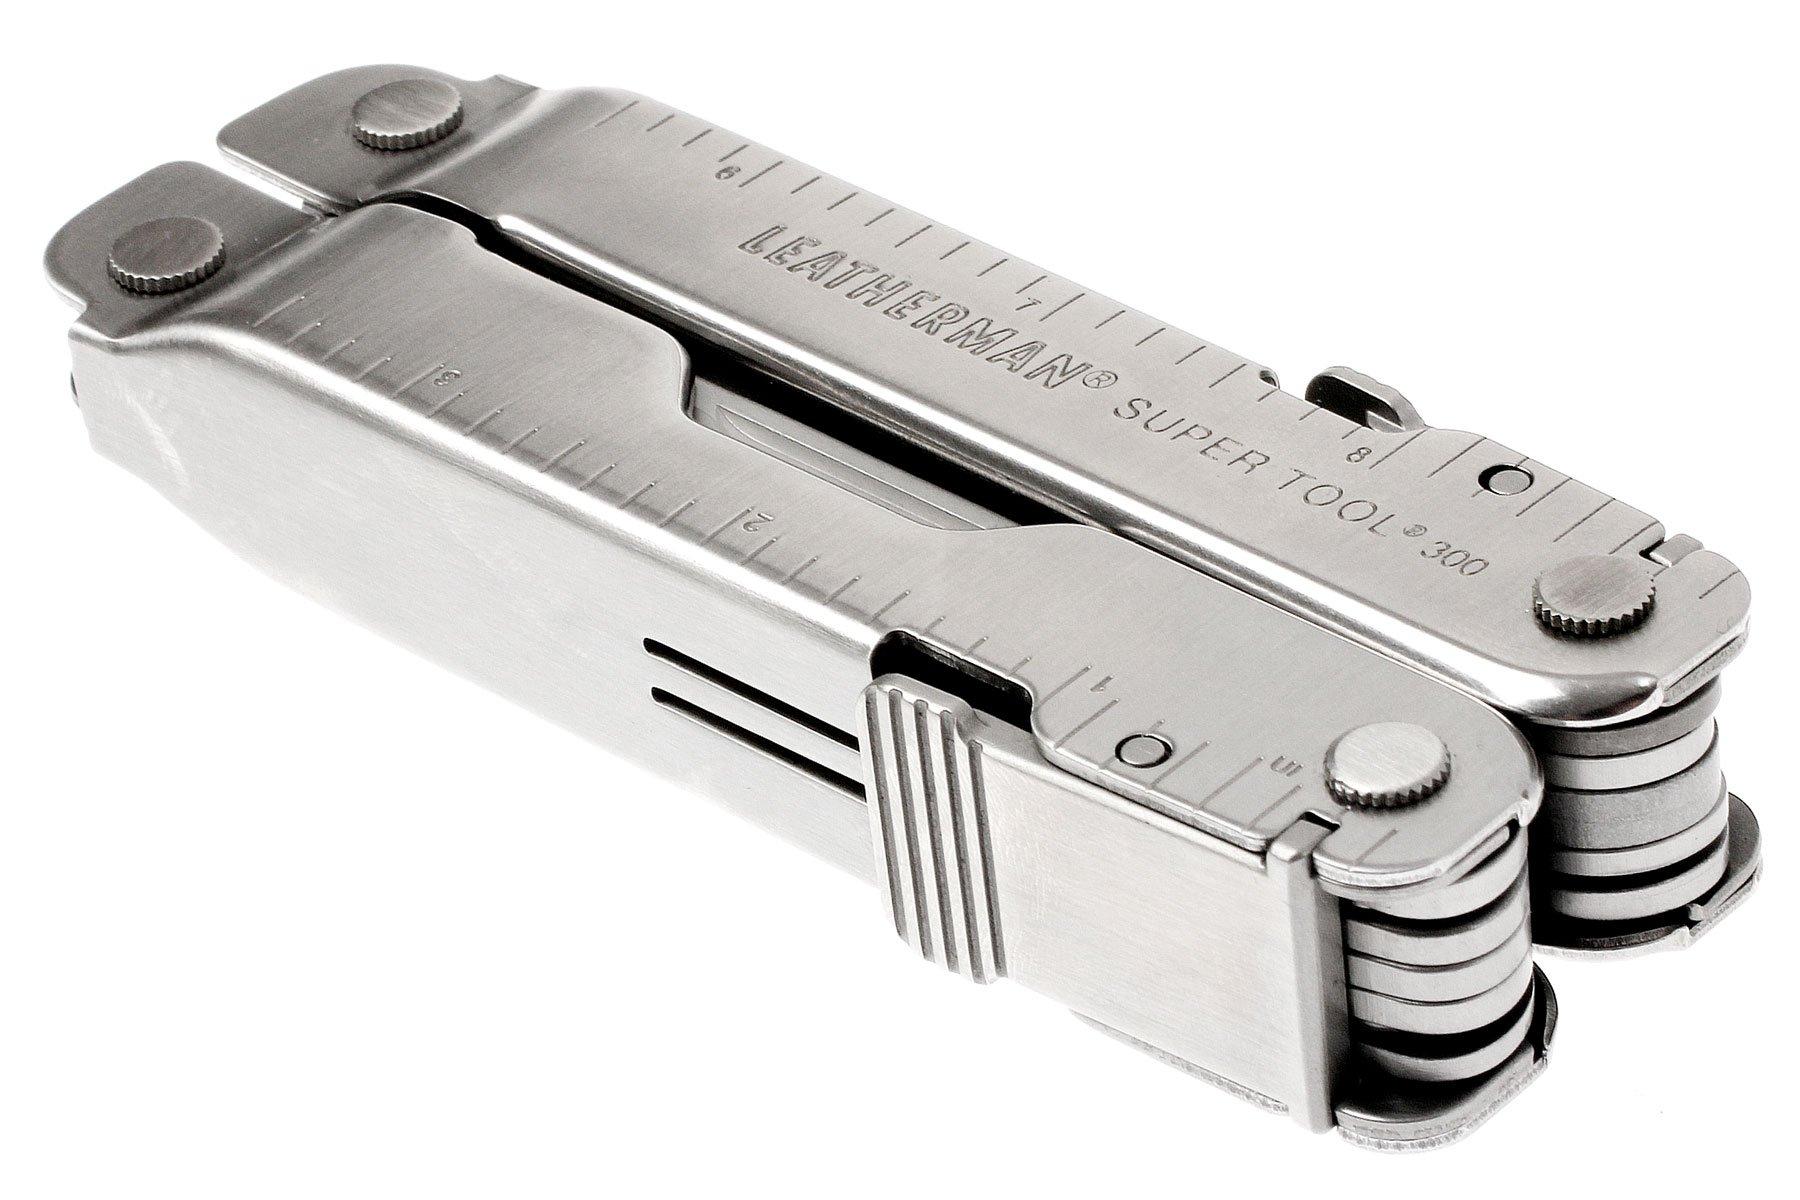 How do you close the blades on a leatherman super tool